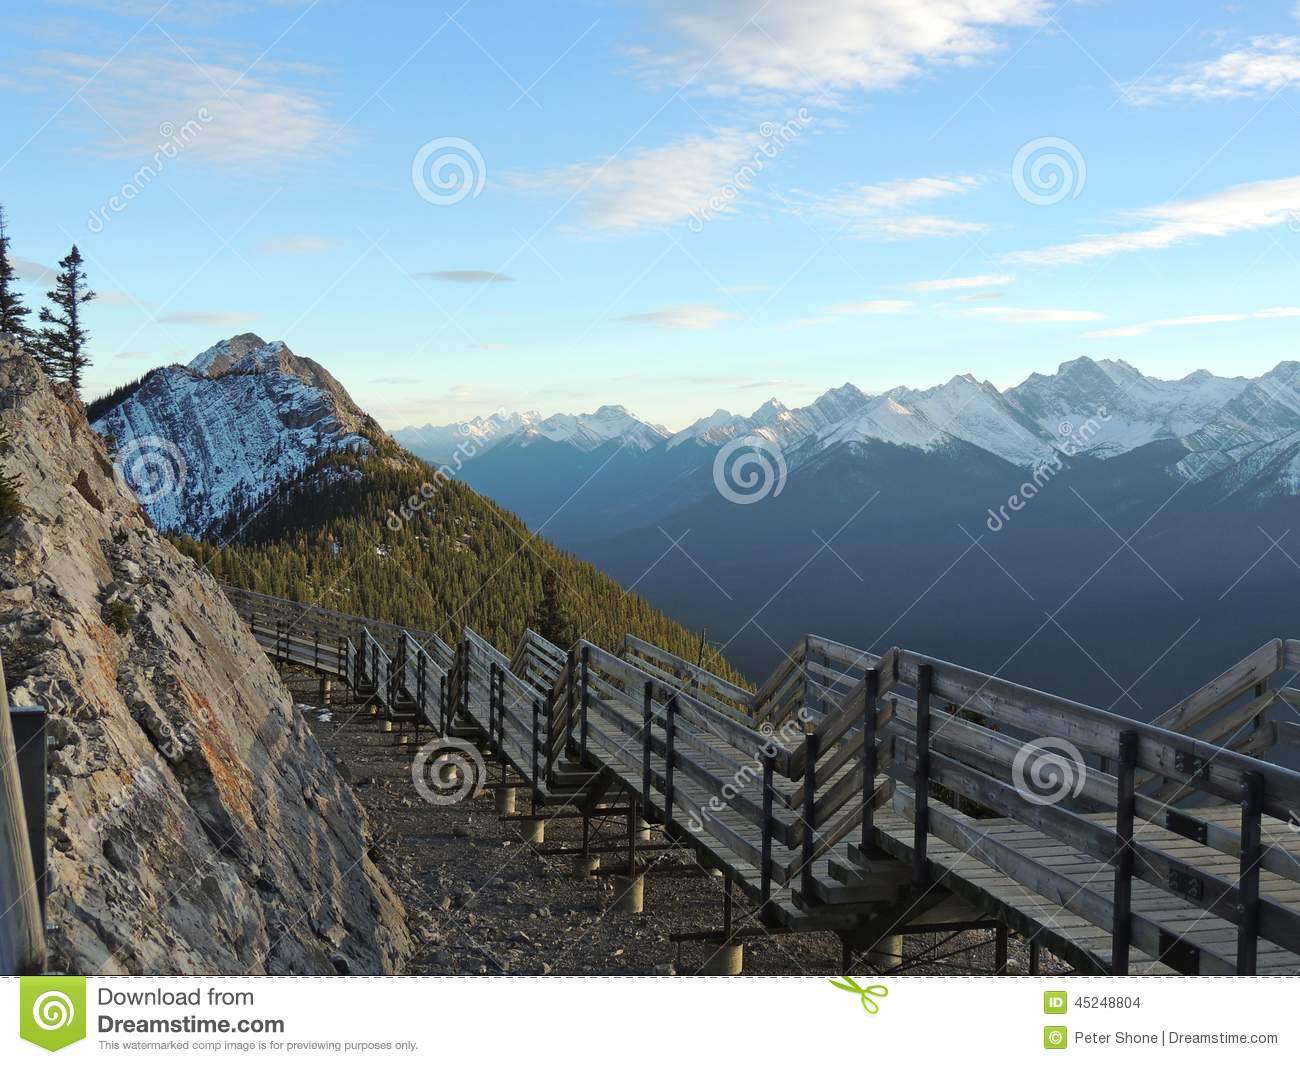 Sulphur Mountain clipart #15, Download drawings